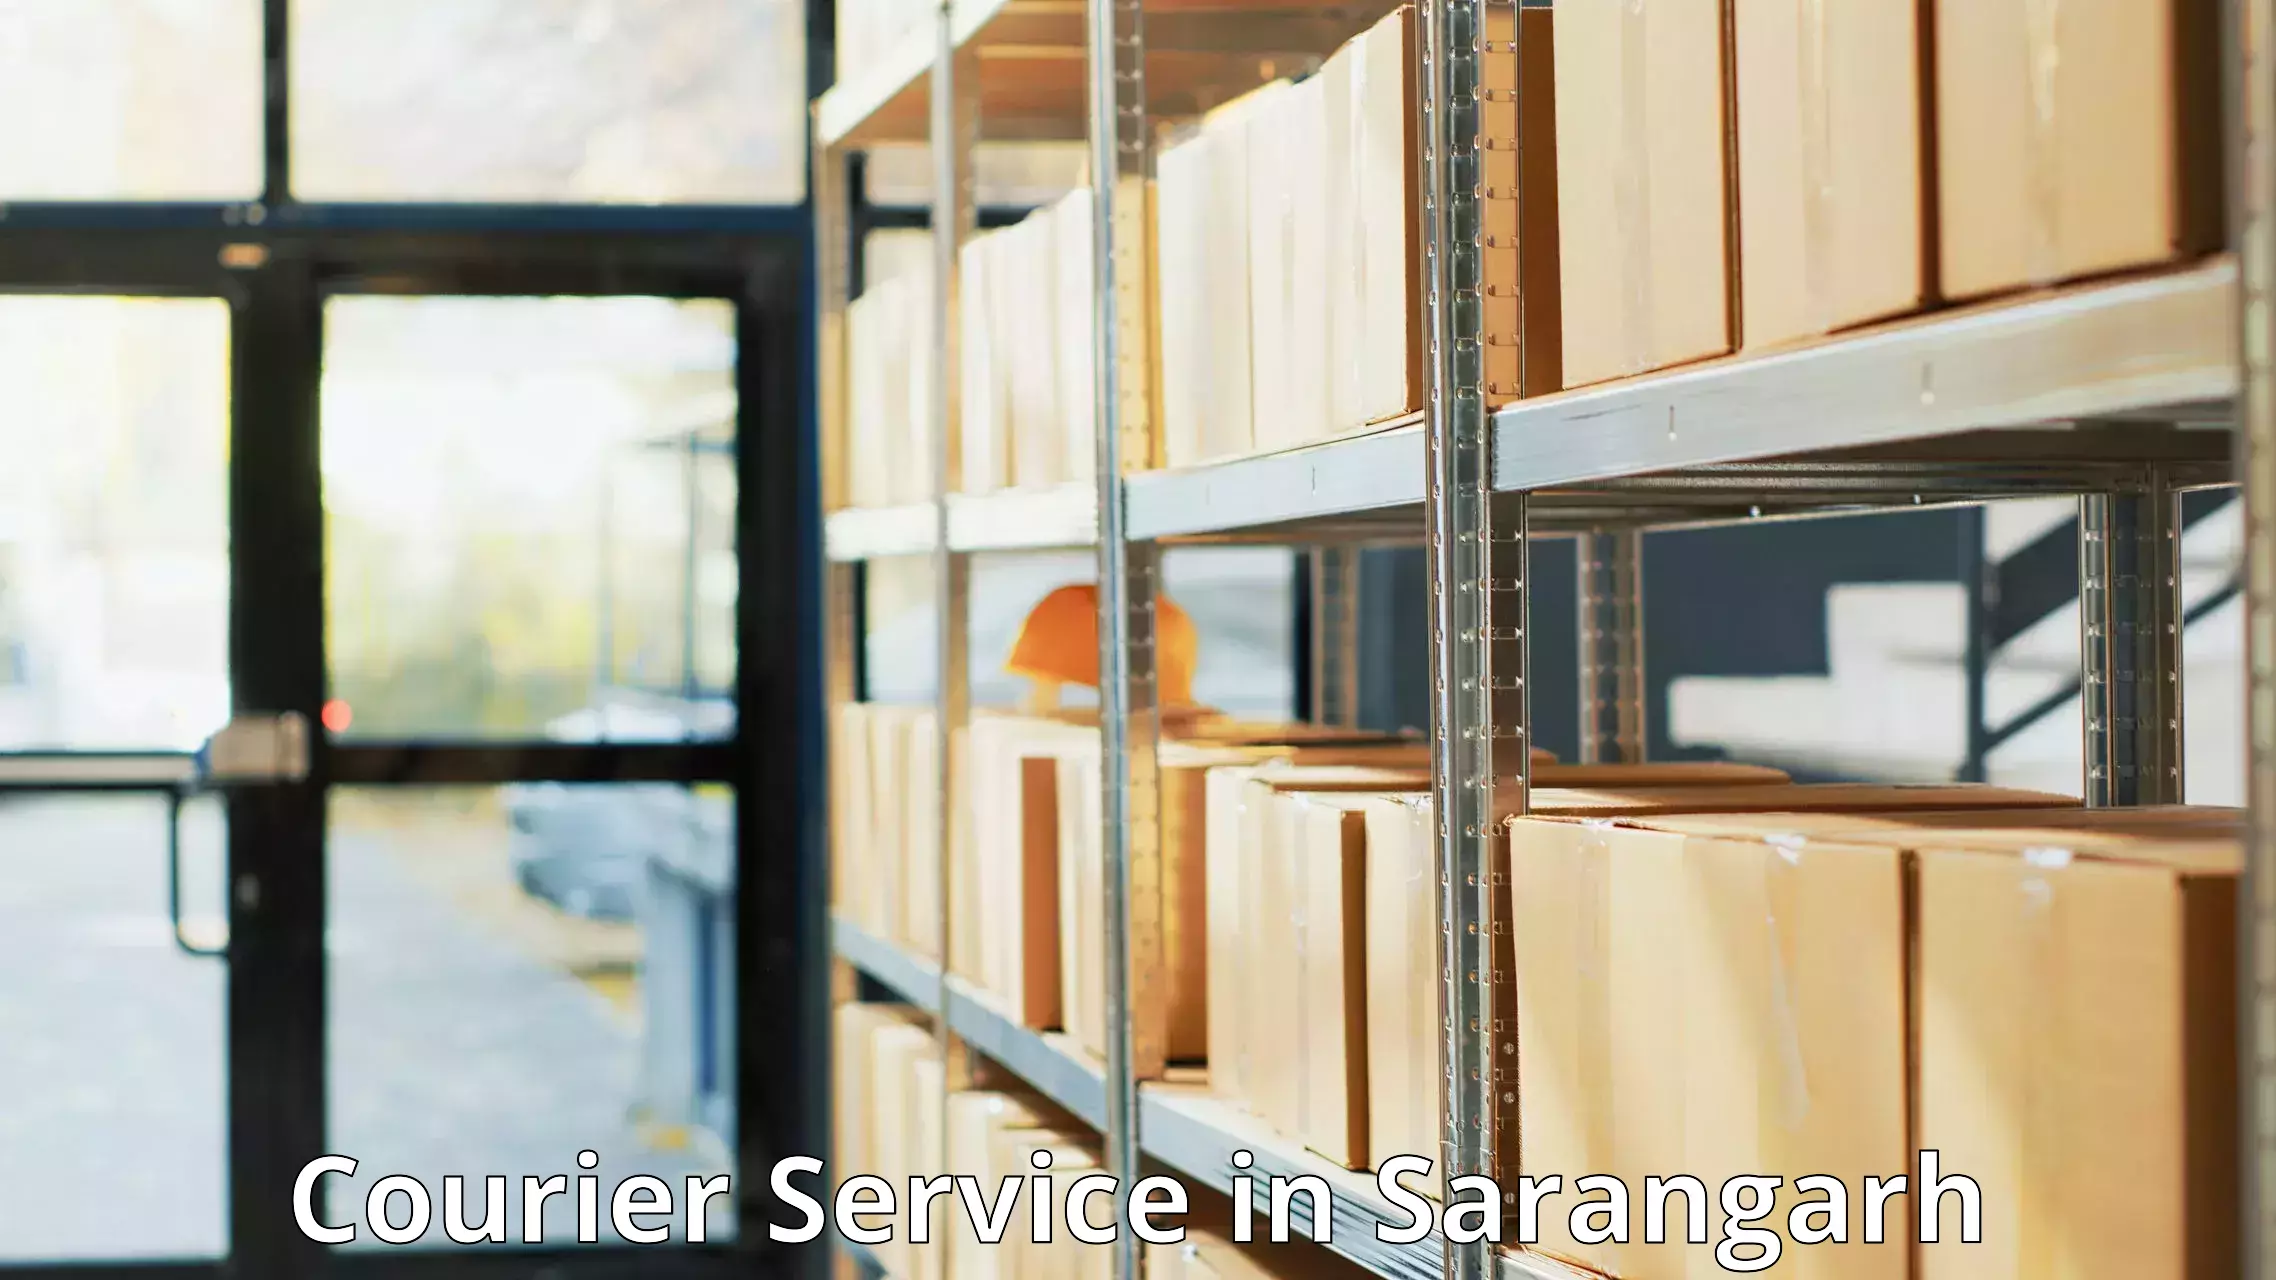 Nationwide courier service in Sarangarh